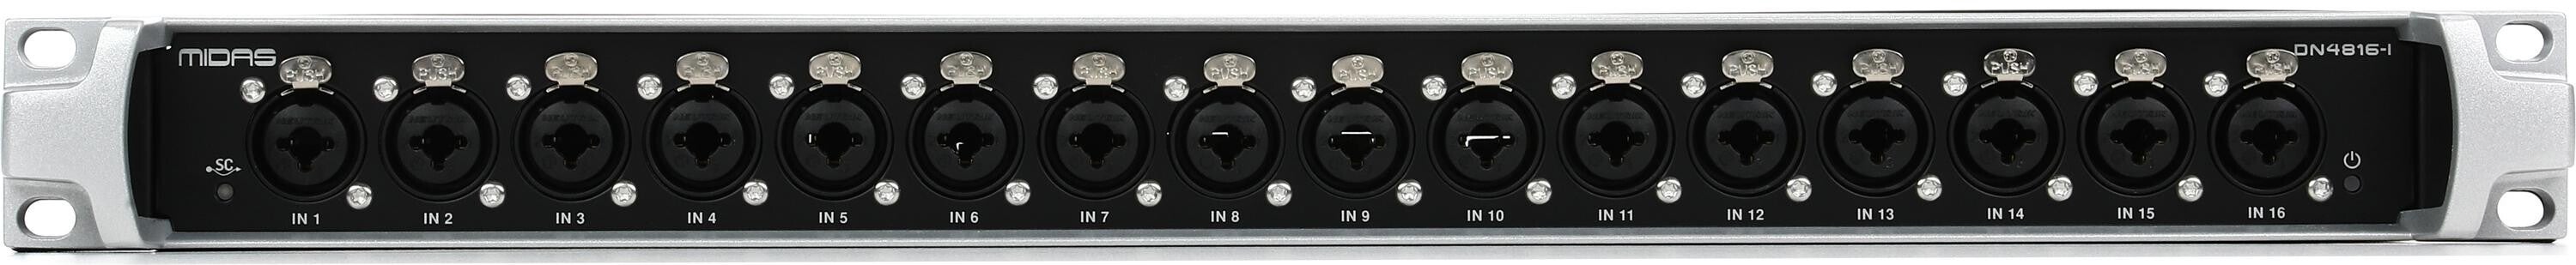 Midas DN4816-O StageConnect Interface | Sweetwater